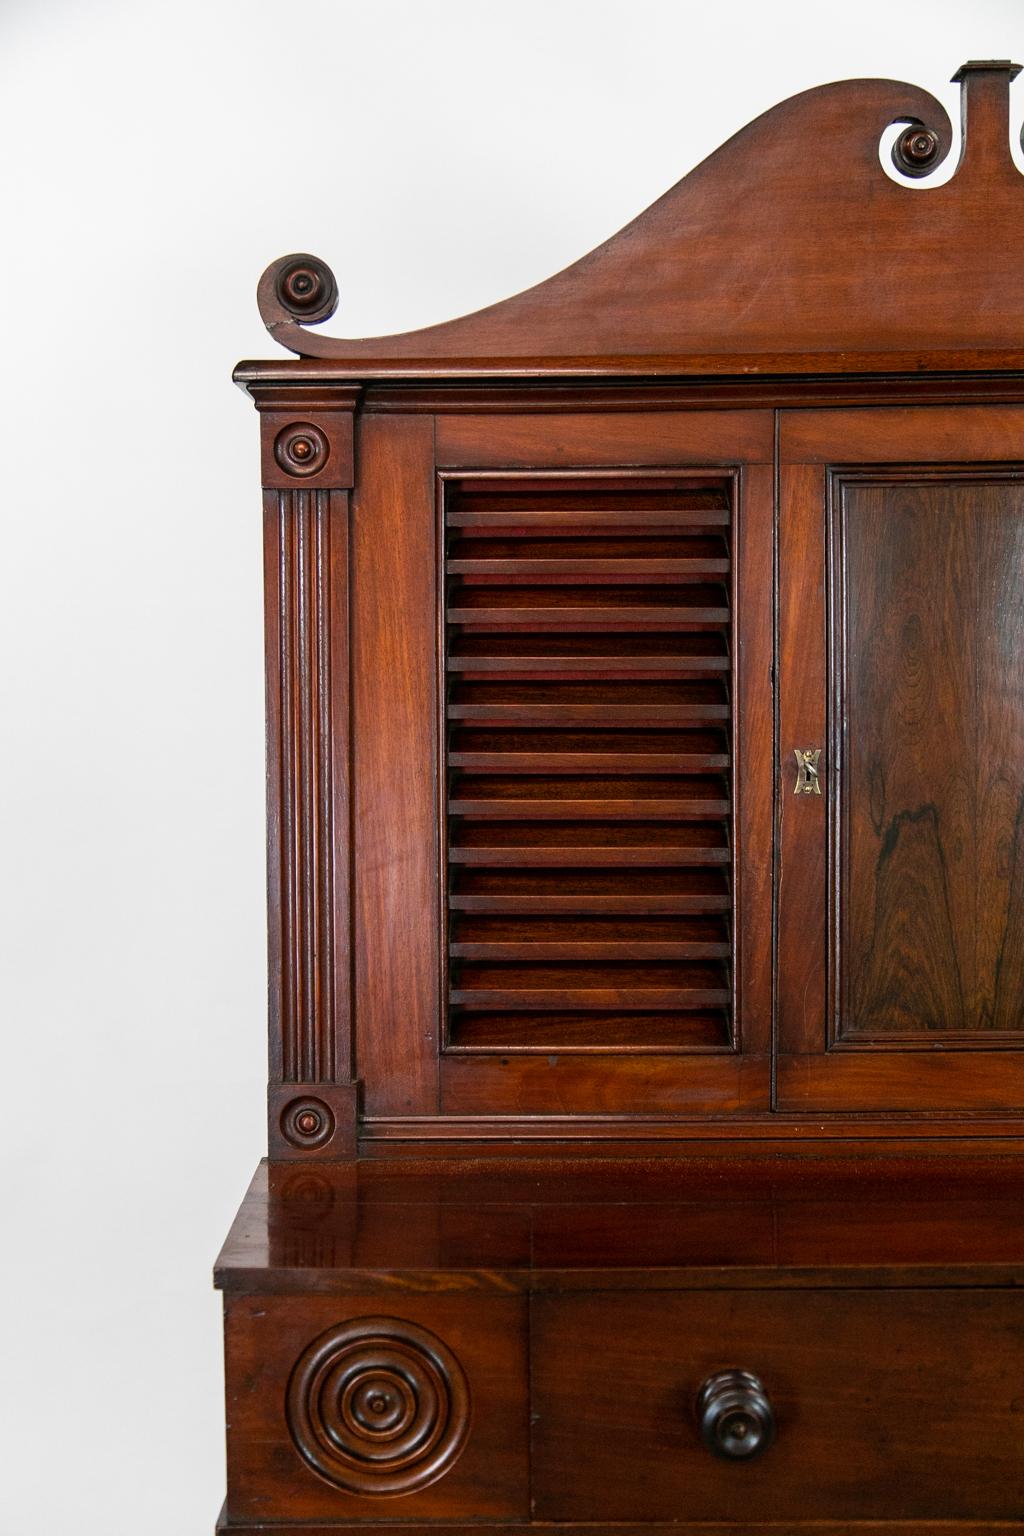 This mahogany cabinet has louvered panels on the front and sides of the top section. The door of the top section has a bookmatched rosewood center panel framed with shaped molding. The top has a broken arch top with turned rosettes at the top and